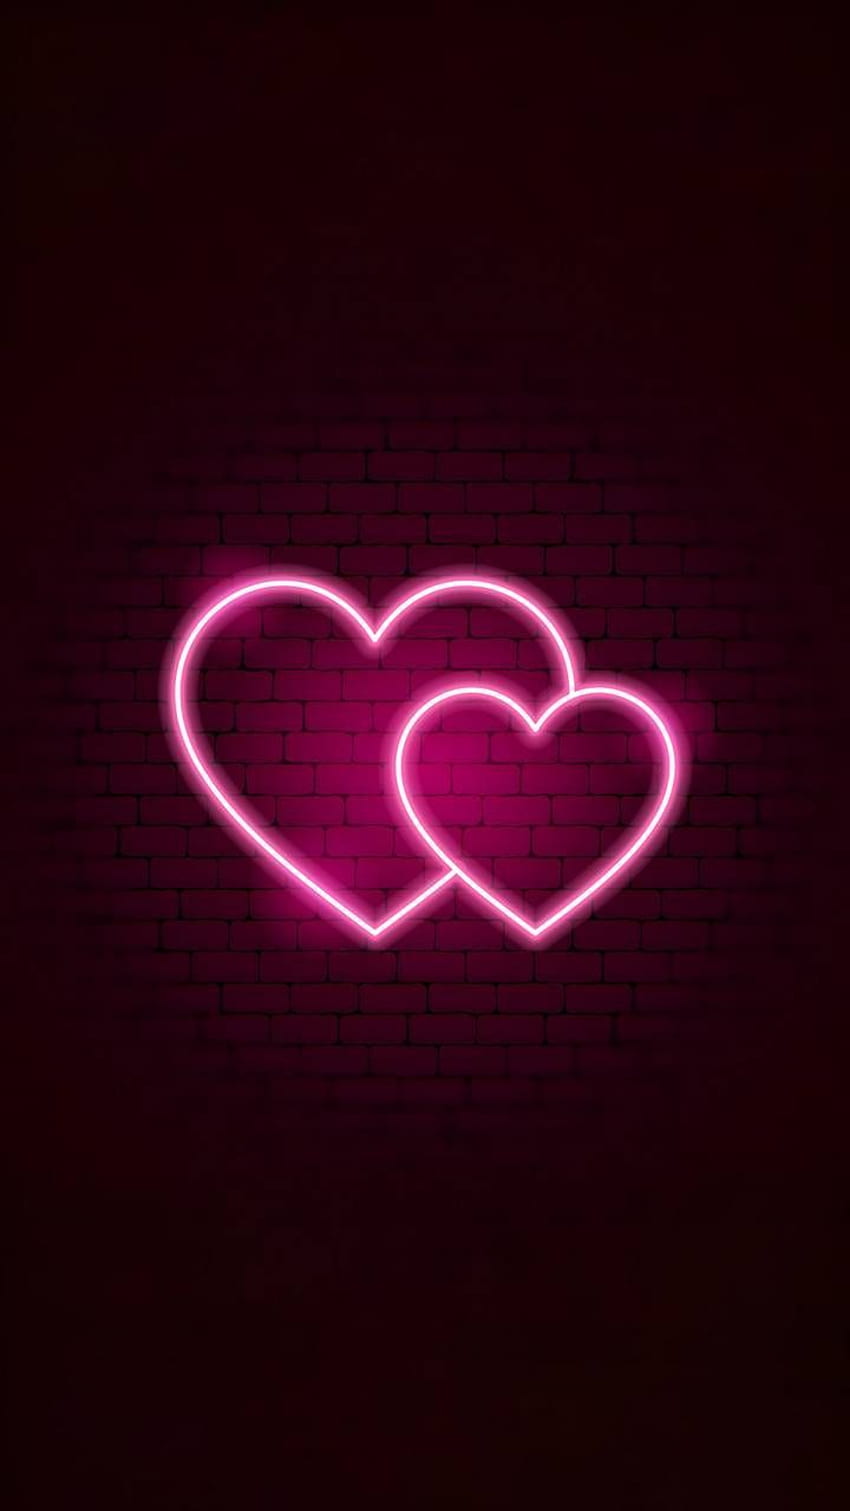 Neon Heart Wallpaper  Heart wallpaper Heart iphone wallpaper Hearts  astethic